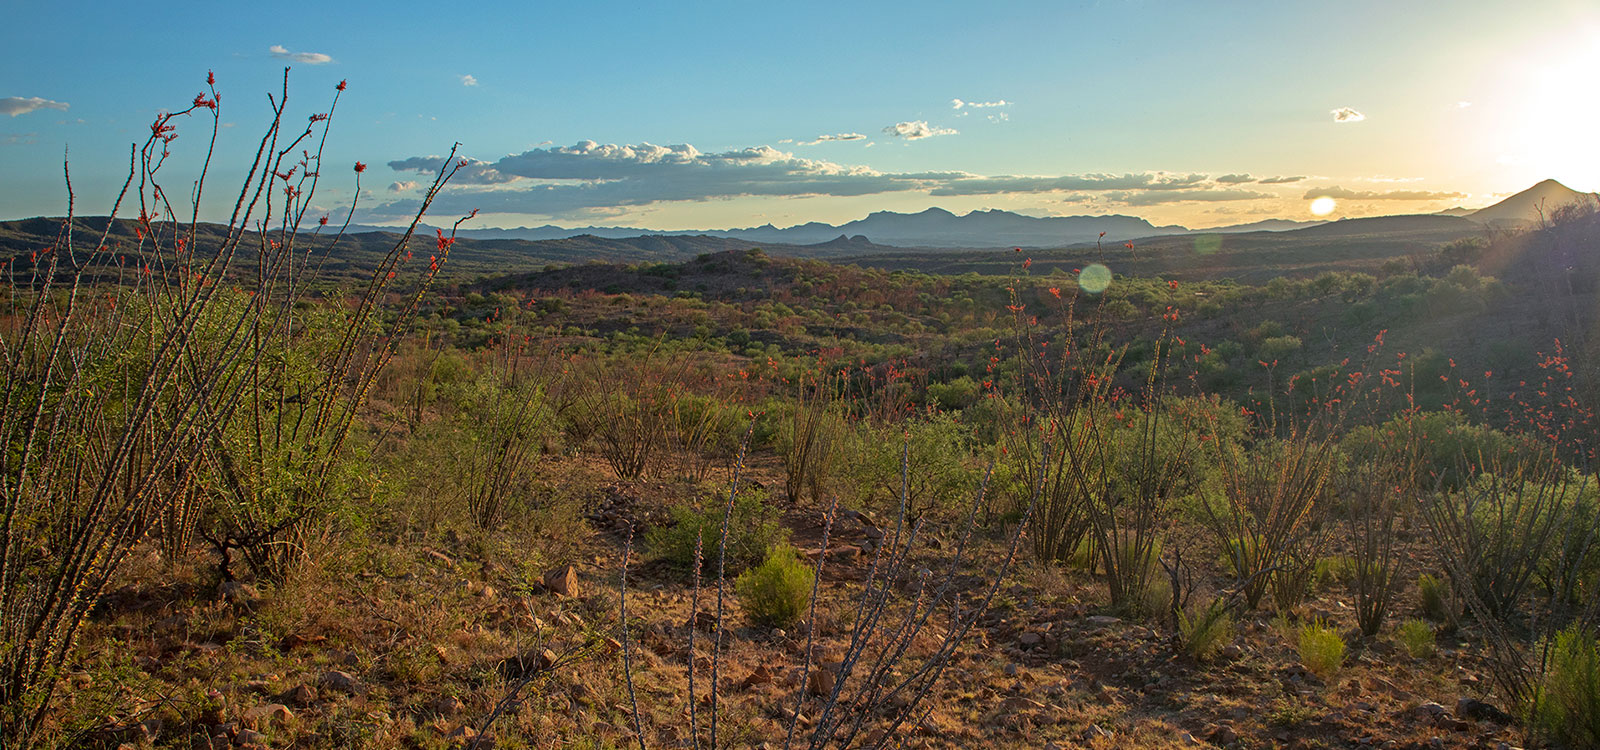 A view of the plant life in the Sonoita Creek Natural Area